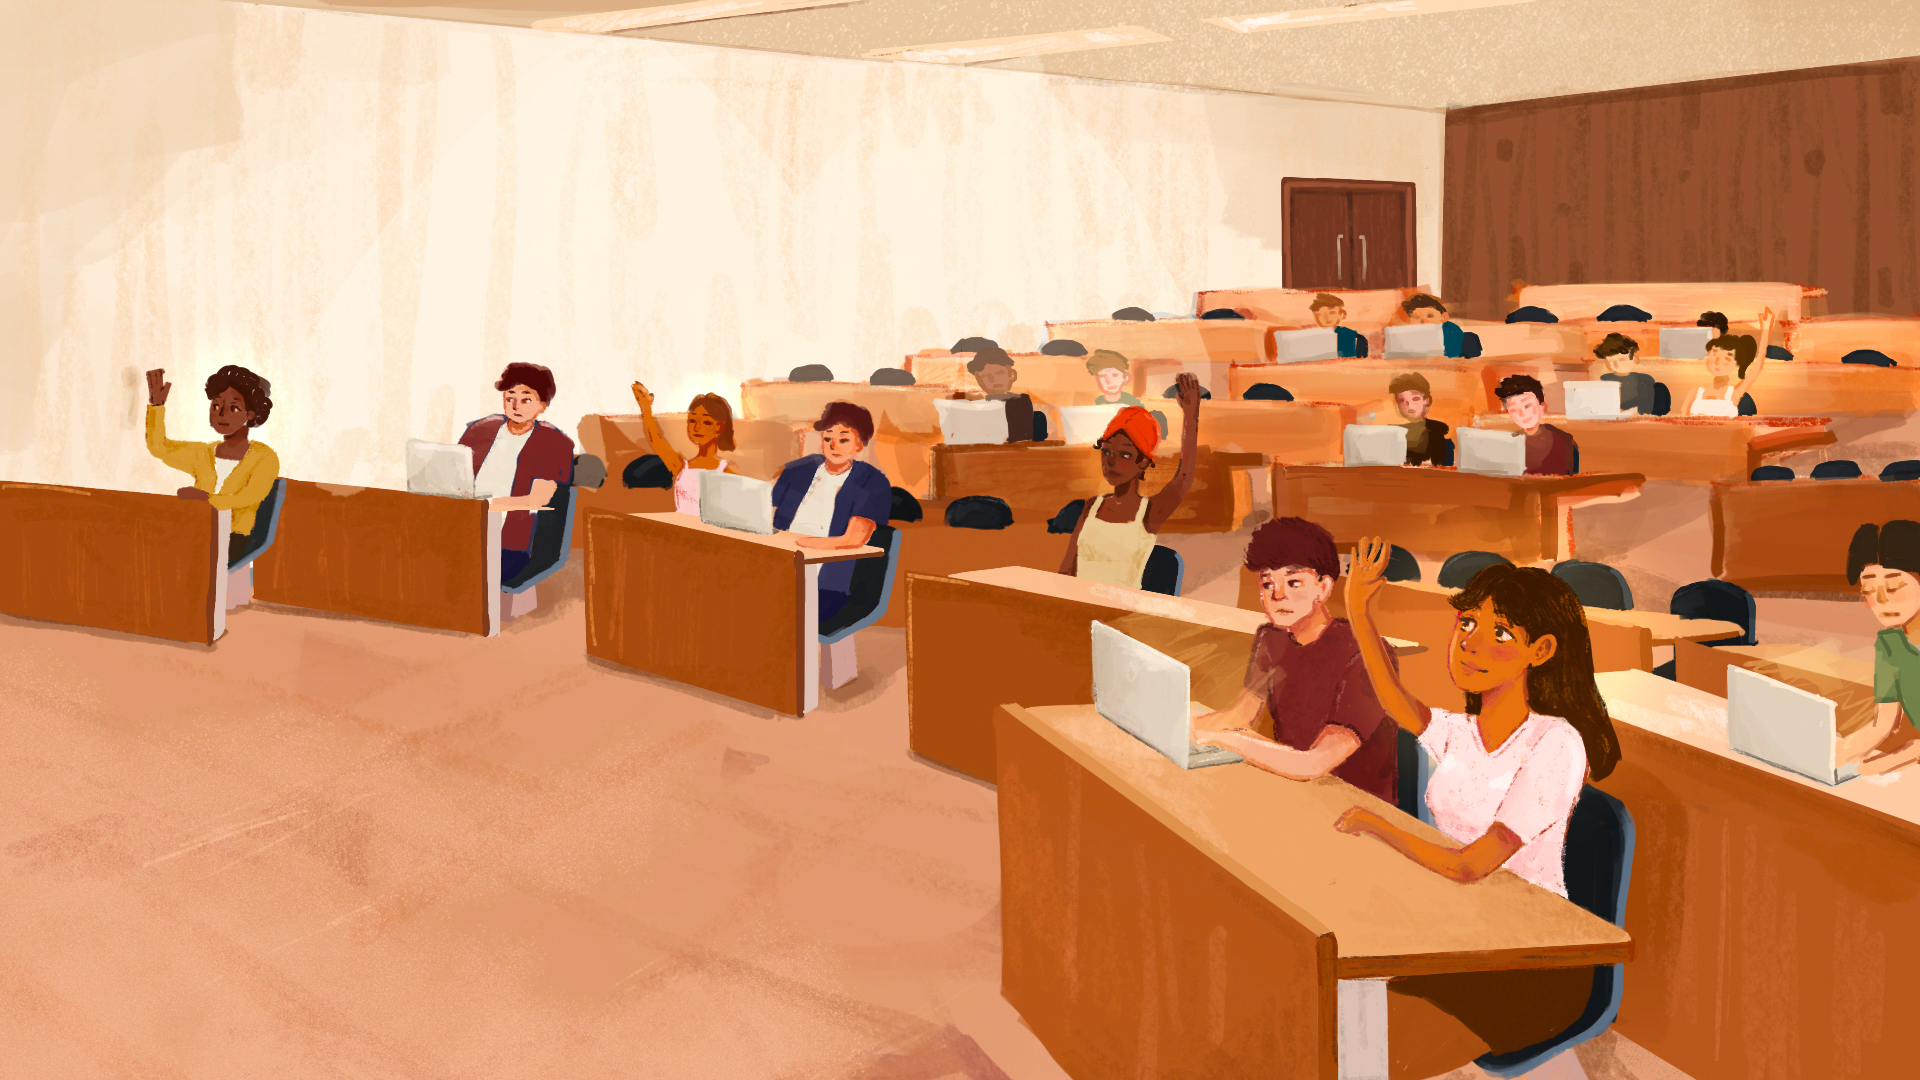 Illustration of college students sitting in a lecture hall with women students raising their hands